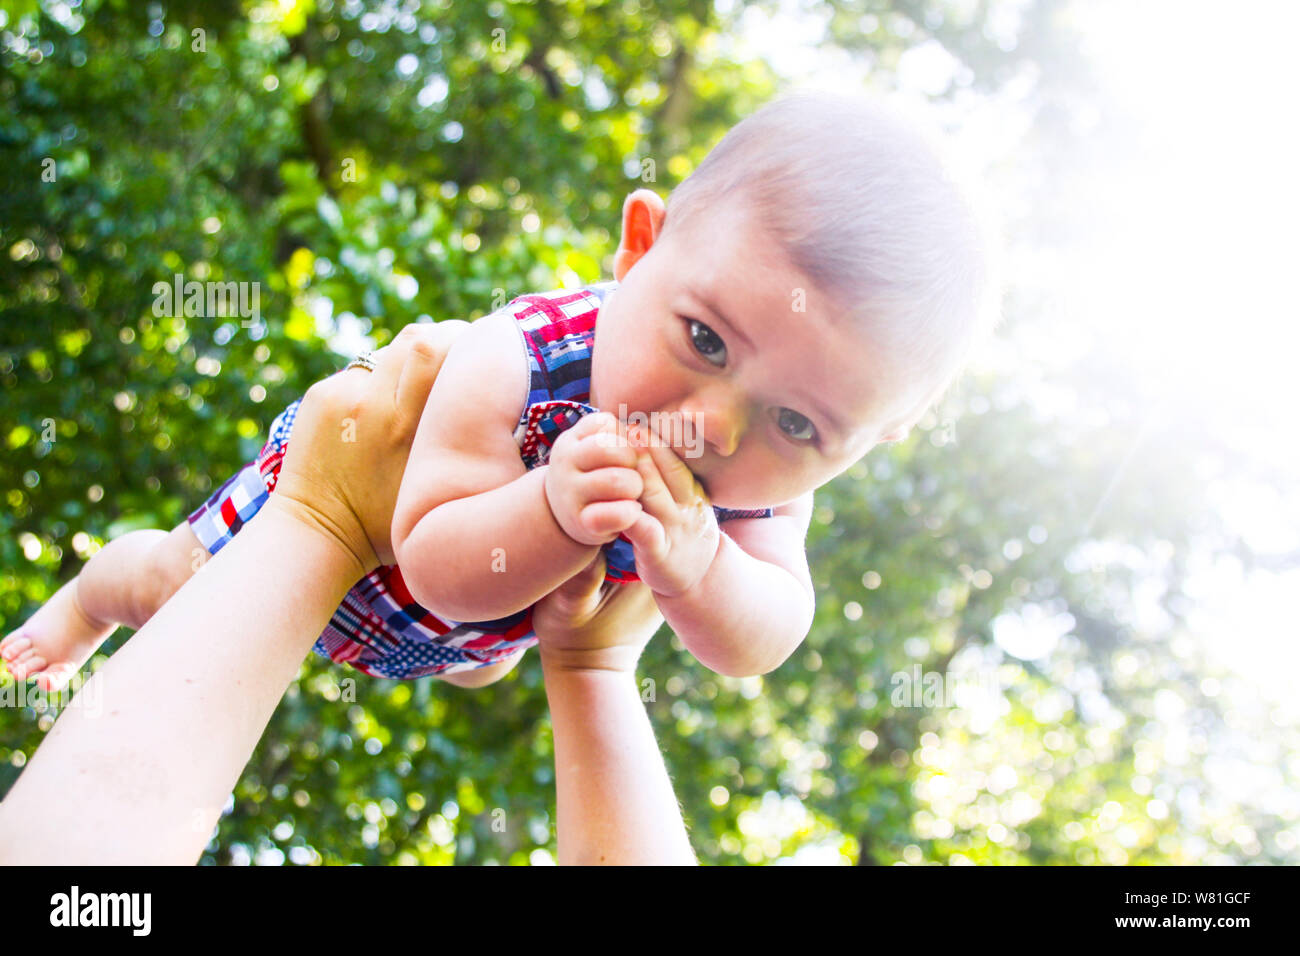 Infant Boy Being Held up in the Air Stock Photo